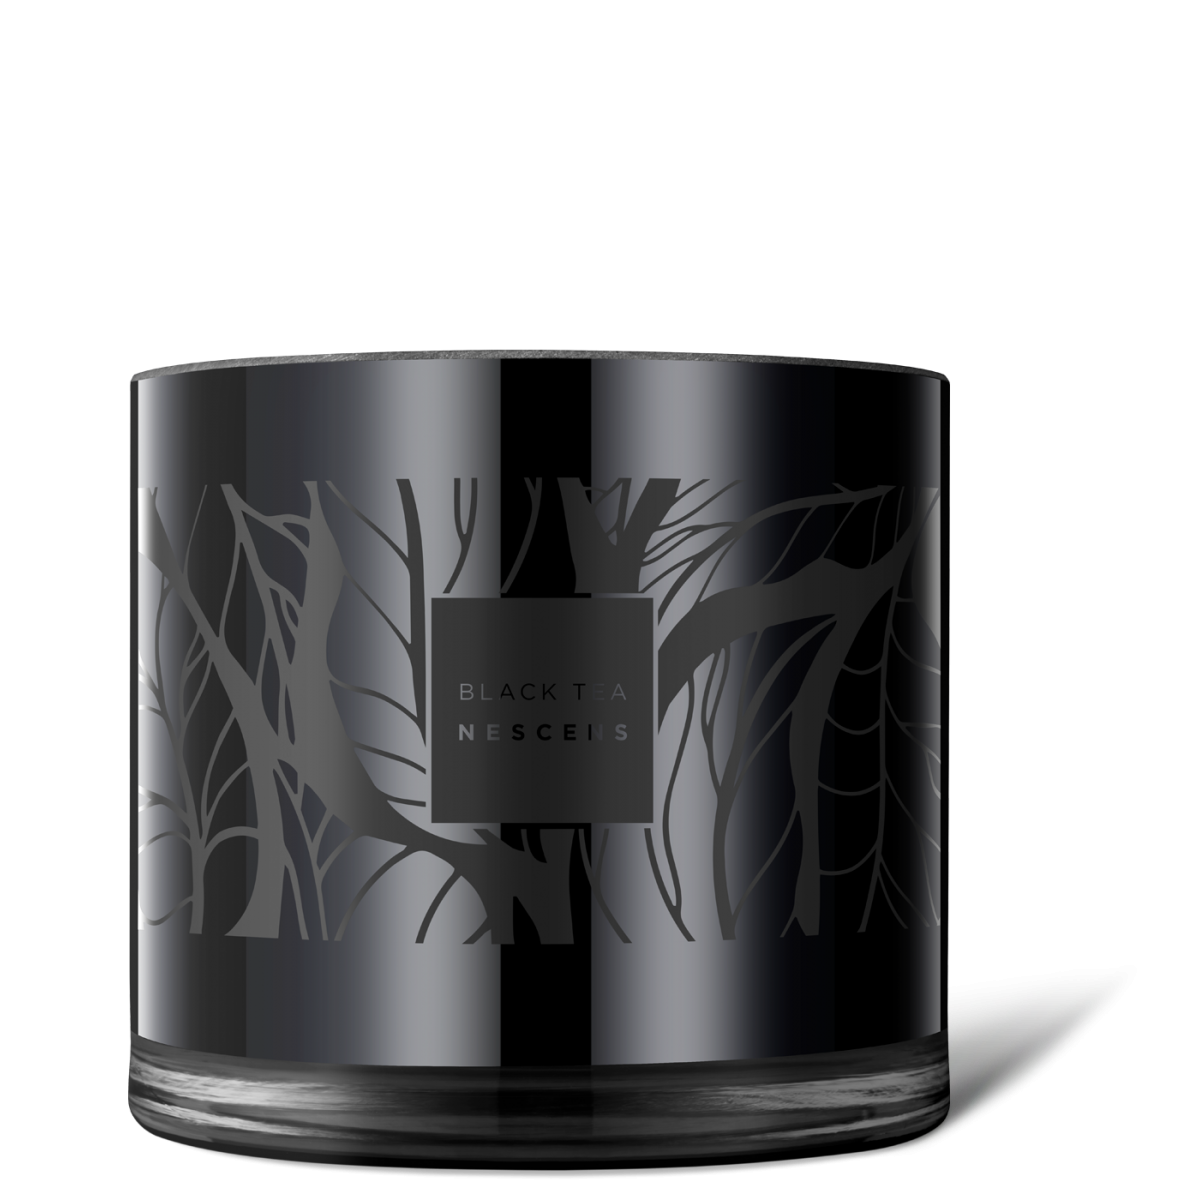 The Limited Edition BLACK TEA candle reveals its warm and enveloping notes for an elegant atmosphere. Made in Grasse